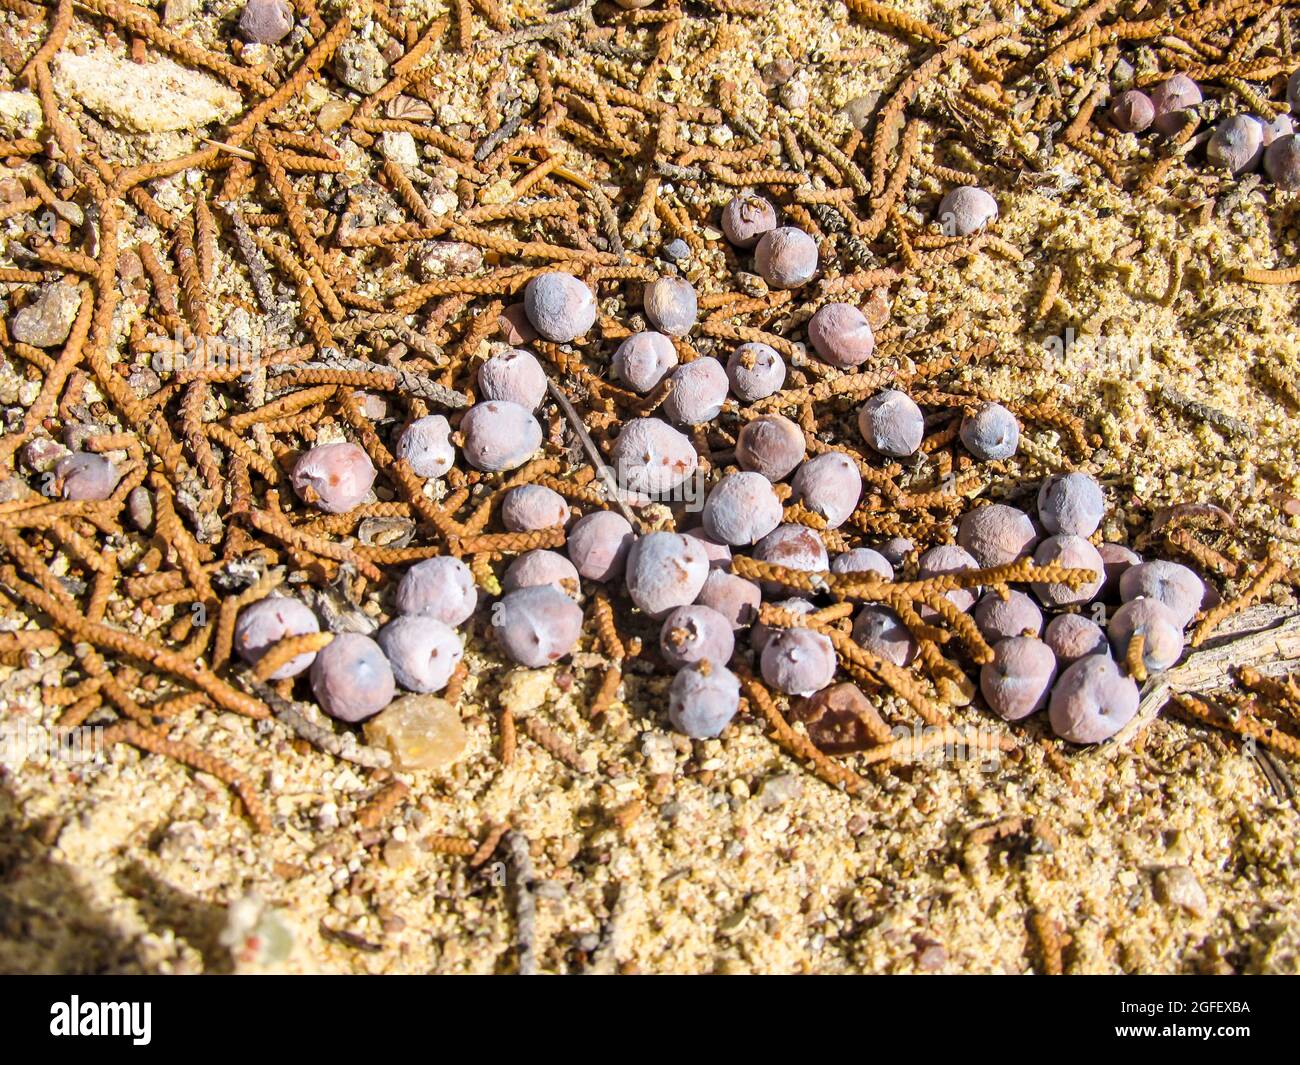 Purple berry-like scaled cones of the Utah Juniper, Juniperus Osteosperma, laying on the ground along with various fallen needles Stock Photo